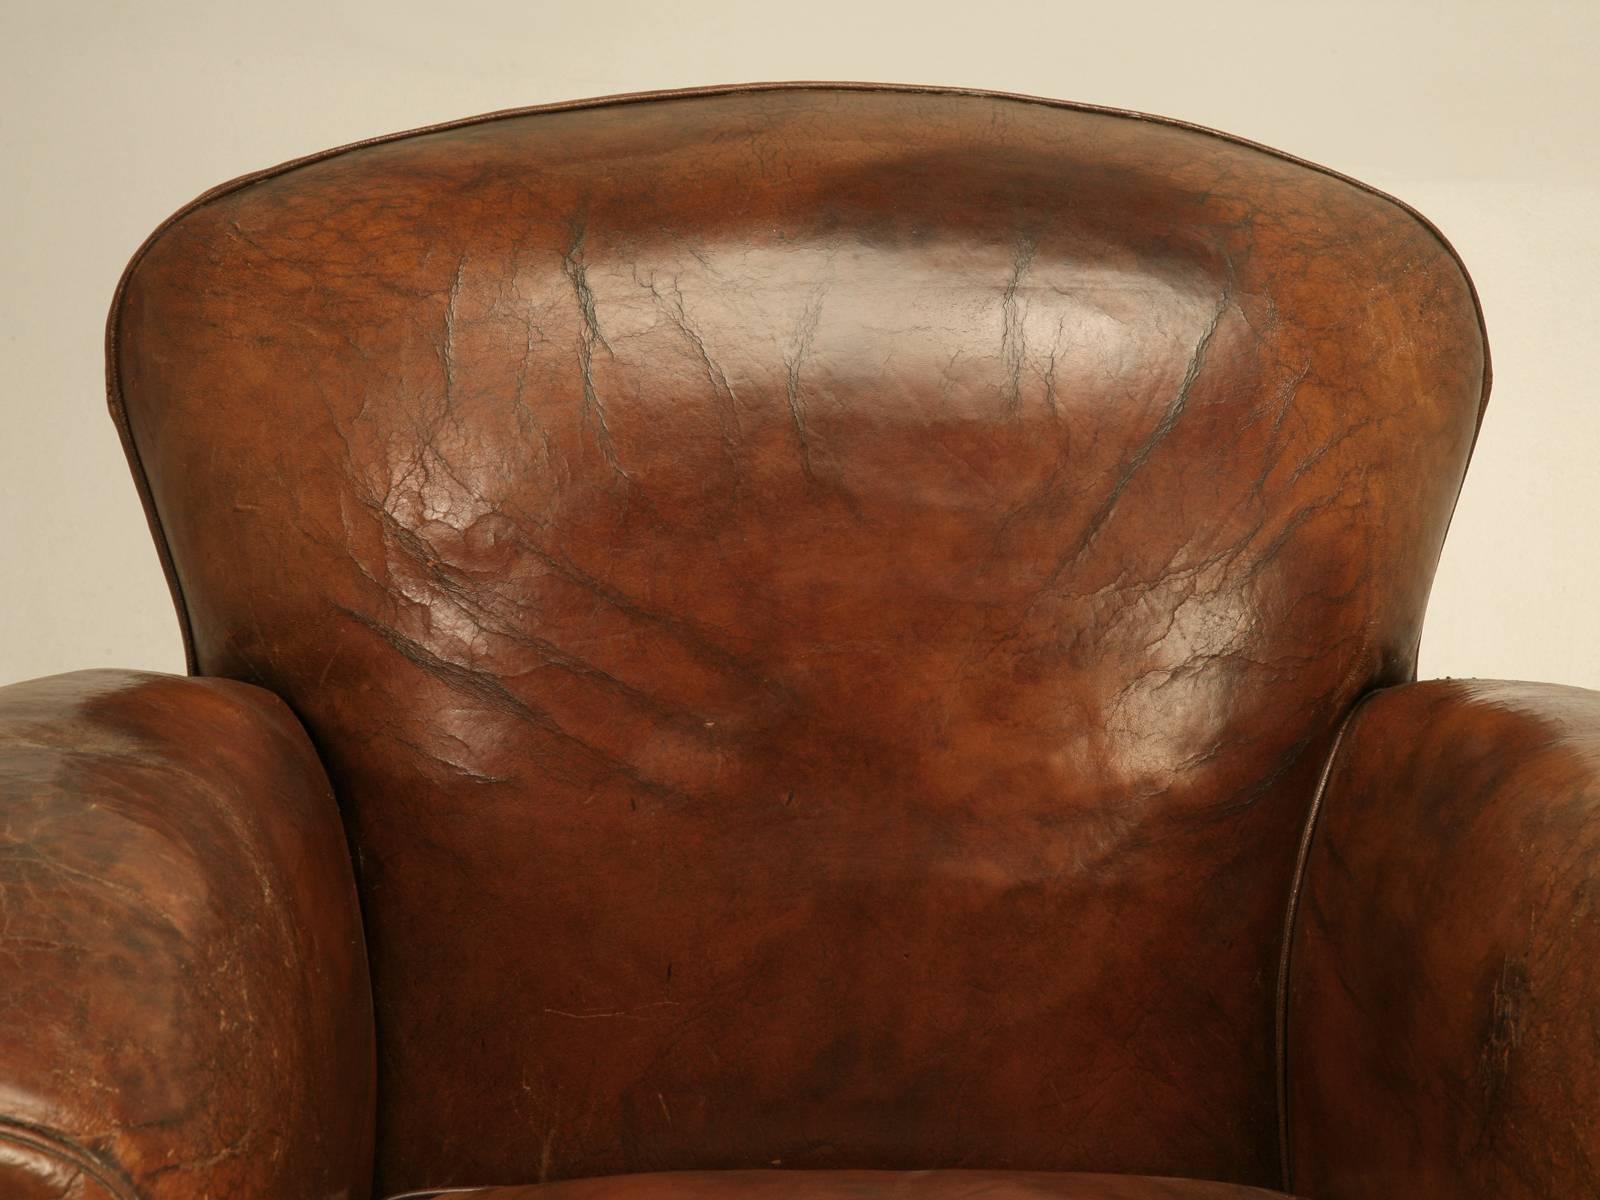 French Art Deco club chair from the 1930s still with its original leather that has been painstakingly restored from the bottom to the top. The inherent richness of the color of this old leather is something that you cannot duplicate and with it’s